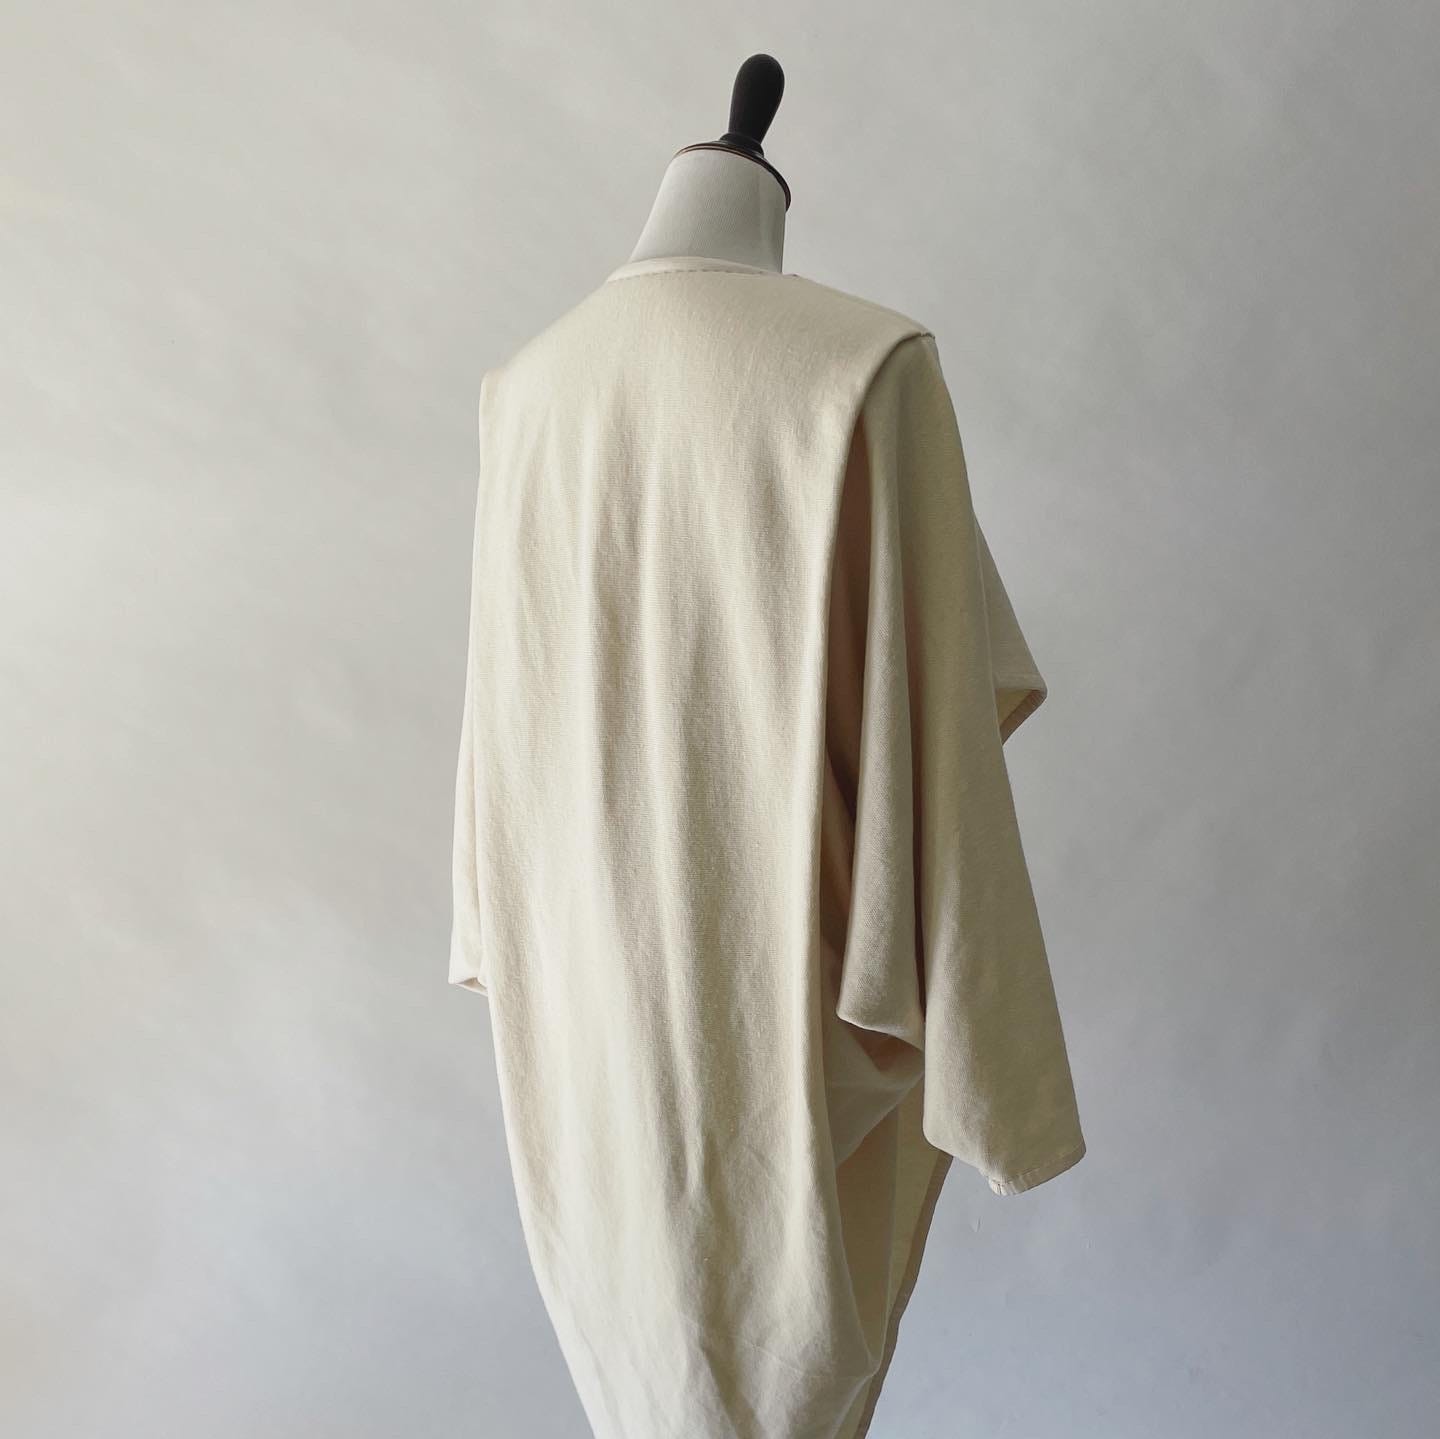 Patrick Kelly’s one-seam coat design executed in Fibershed’s Climate Beneficial Collaborative Cloth. By Mira Musank of Fafafoom Studio.